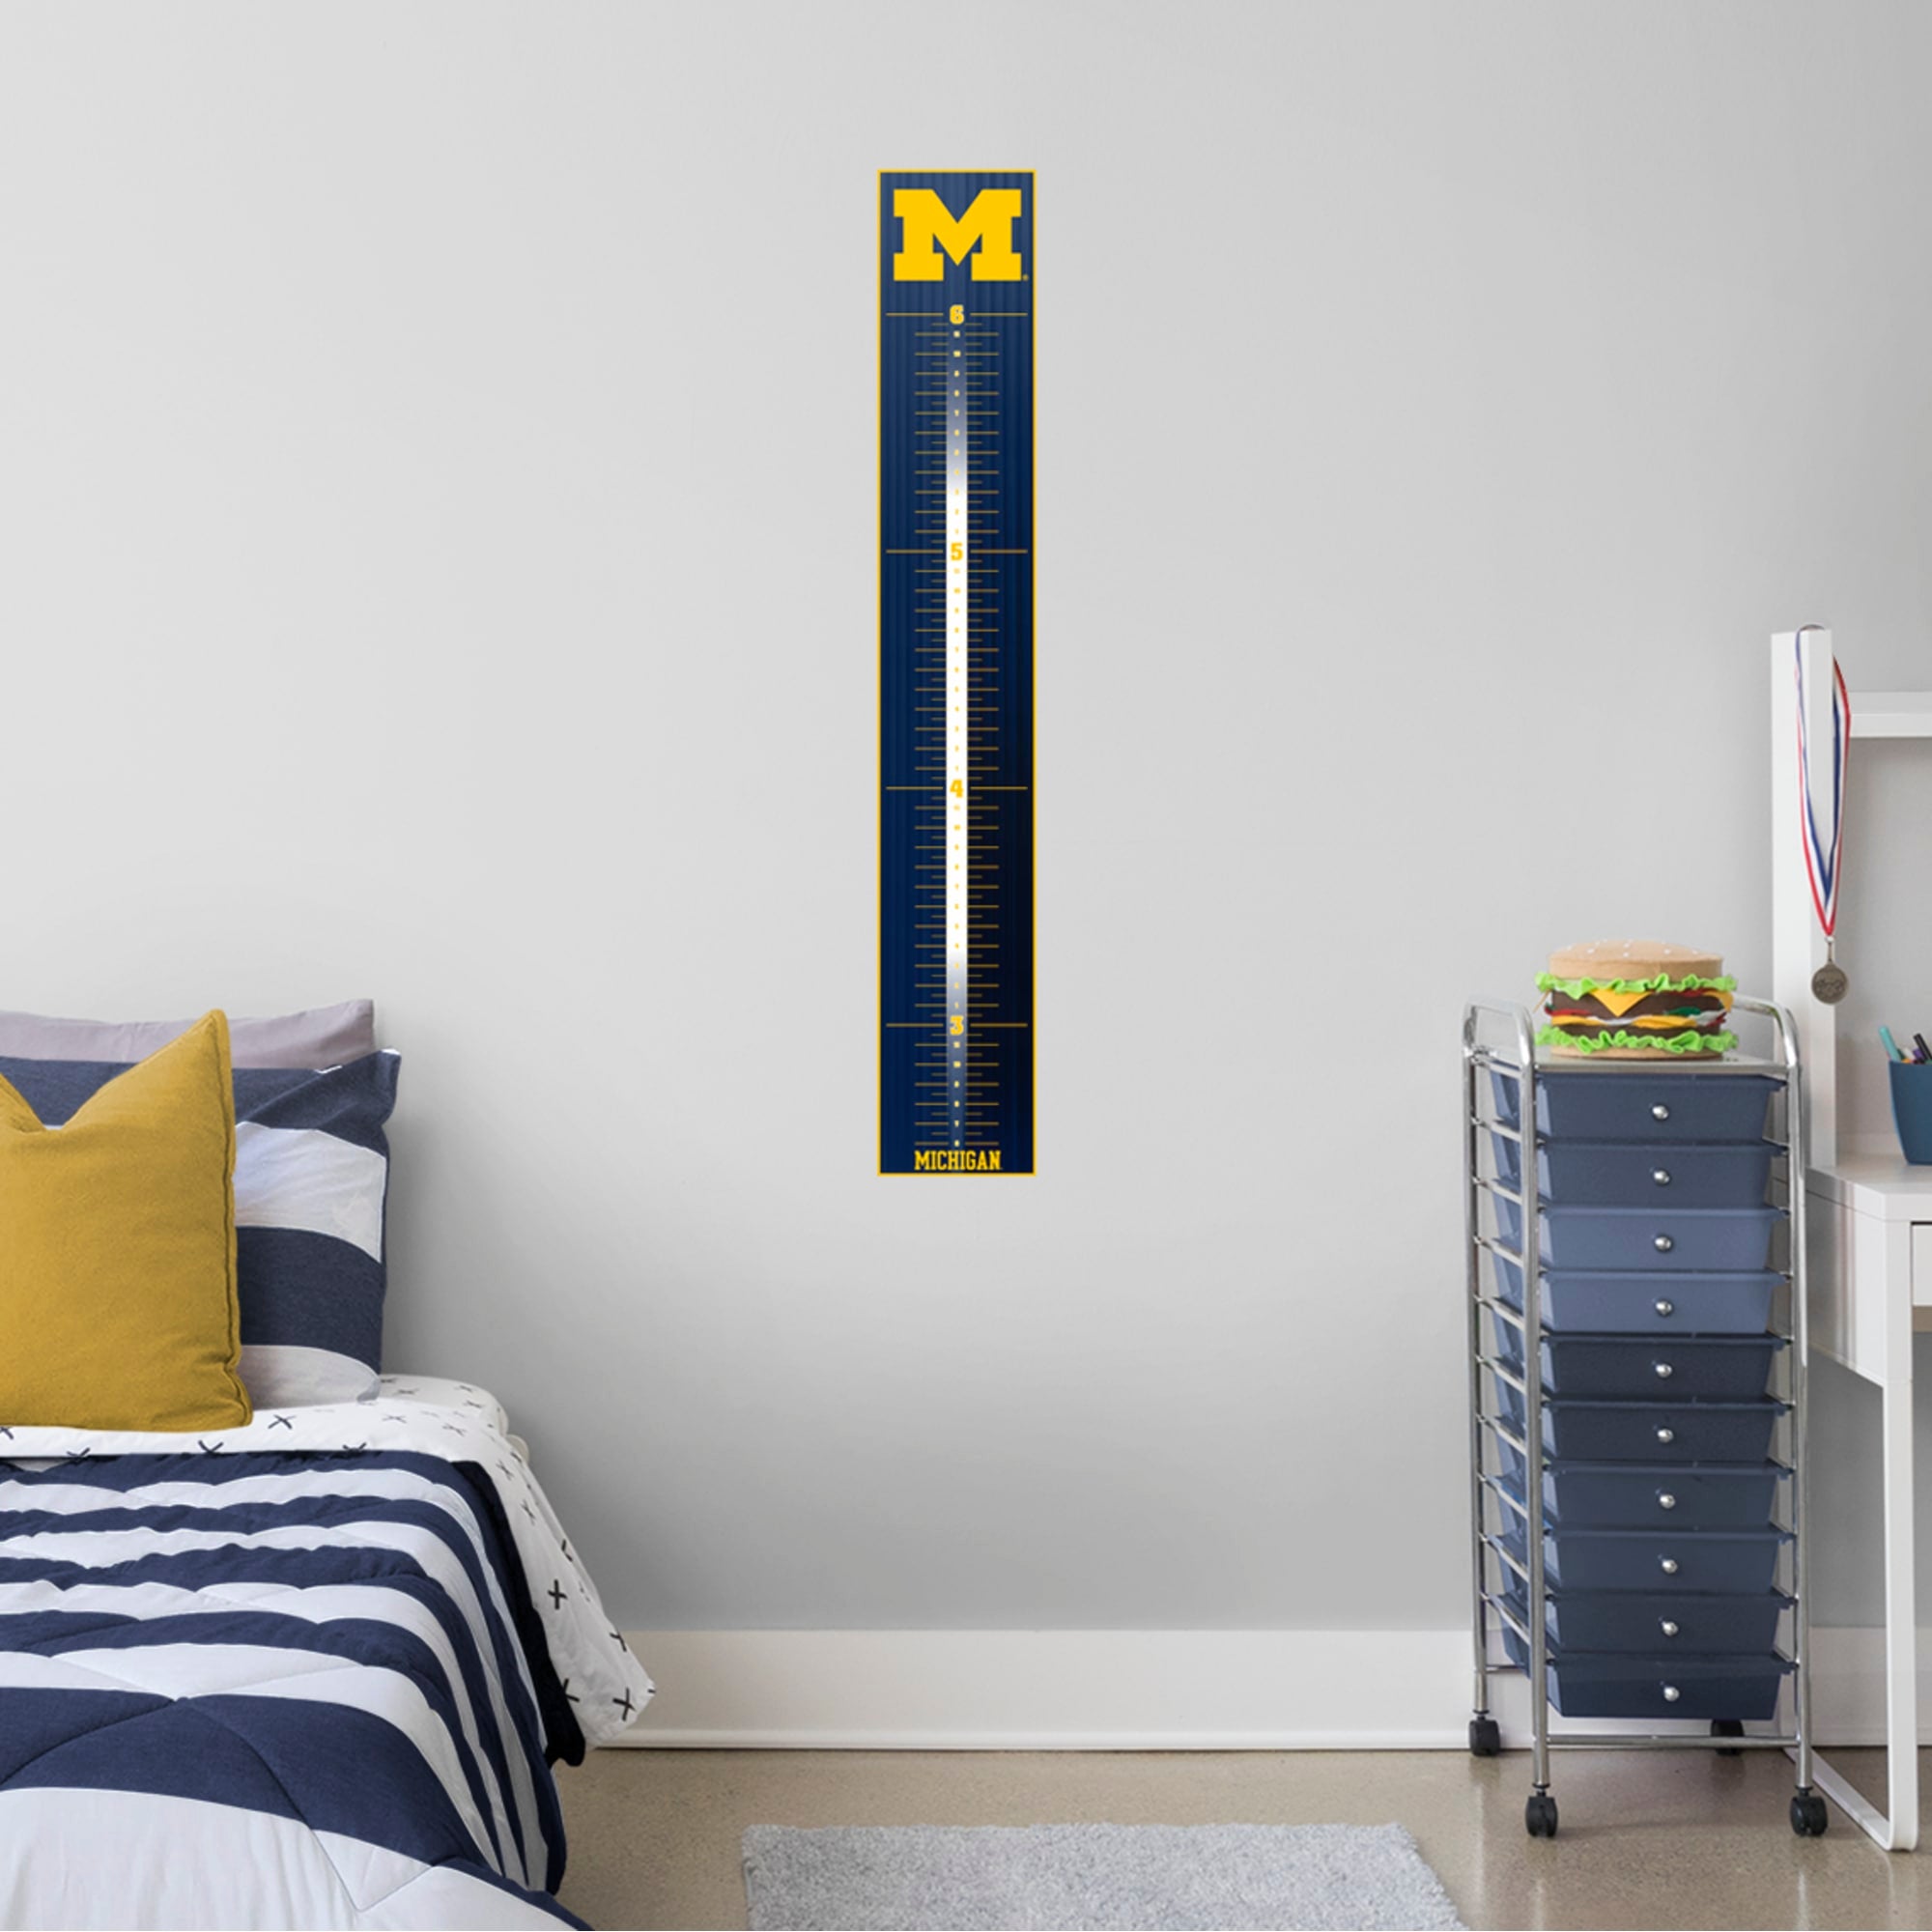 Michigan Wolverines: Logo Growth Chart - Officially Licensed Removable Wall Decal 8.0"W x 51.0"H by Fathead | Vinyl